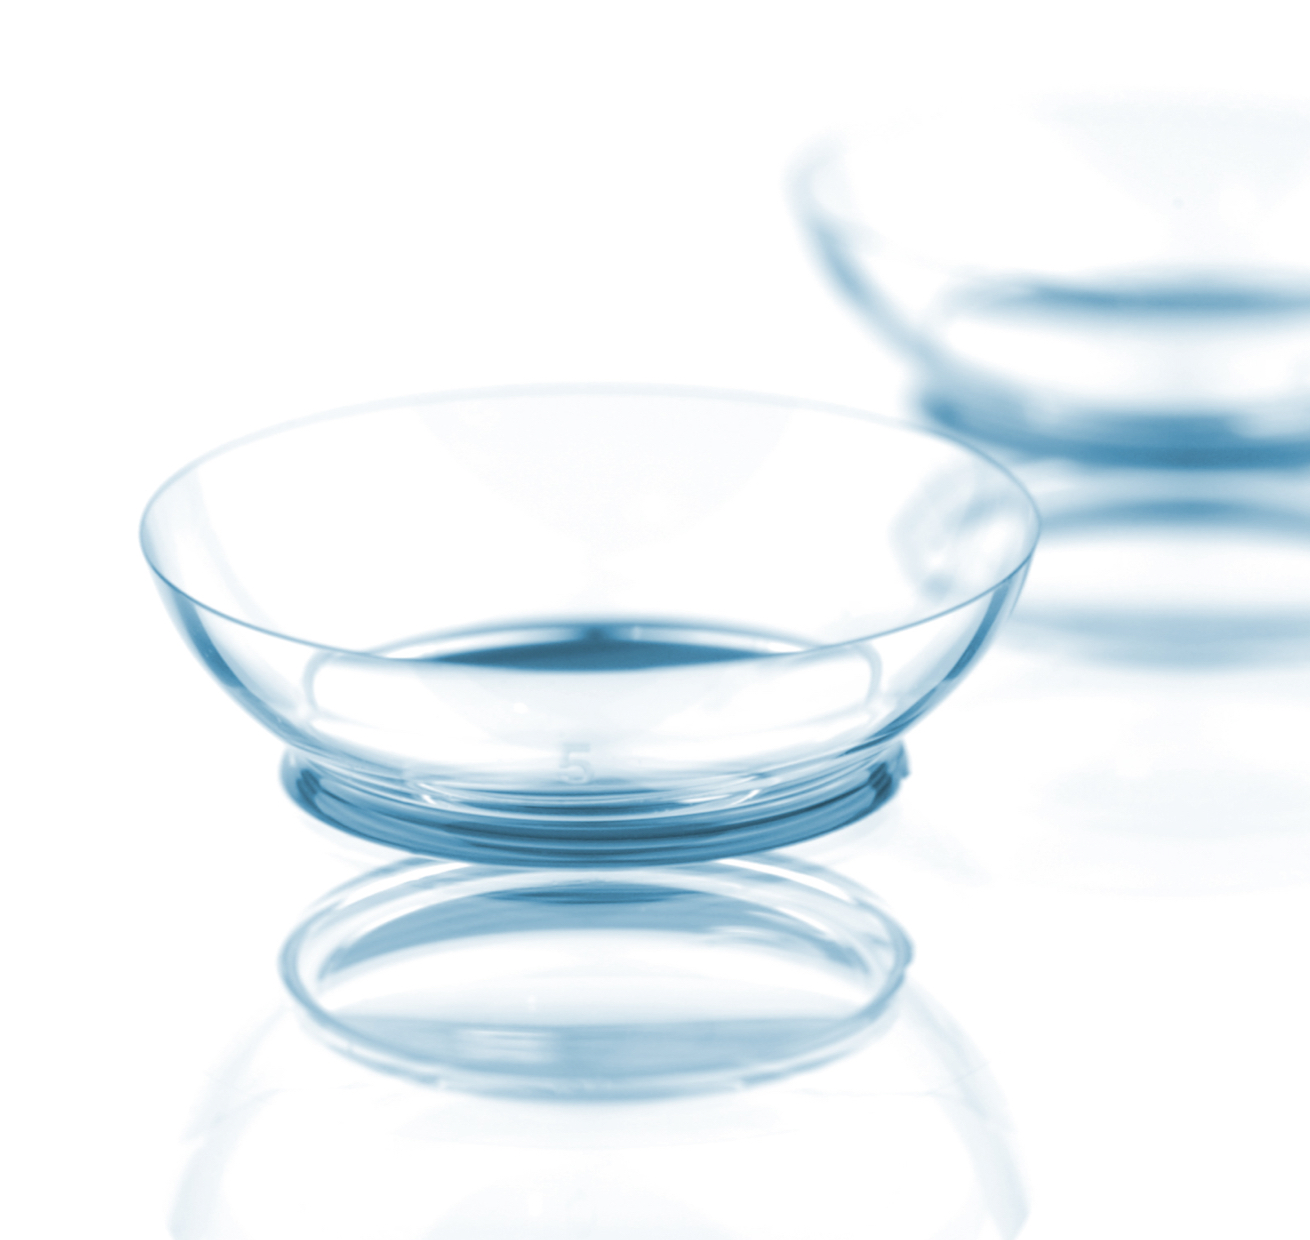 ACUVUE® Contact Lenses are soft (hydrophilic) contact lenses available as spherical and multifocal lenses